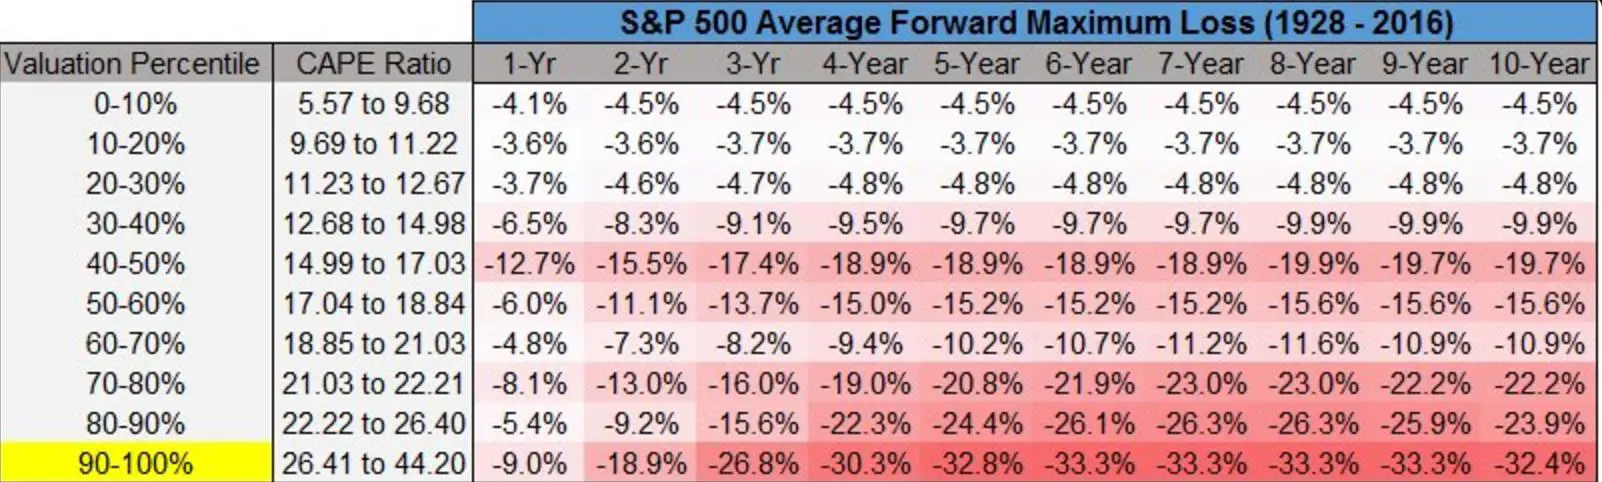 US stocks are currently in the top valuation percentile